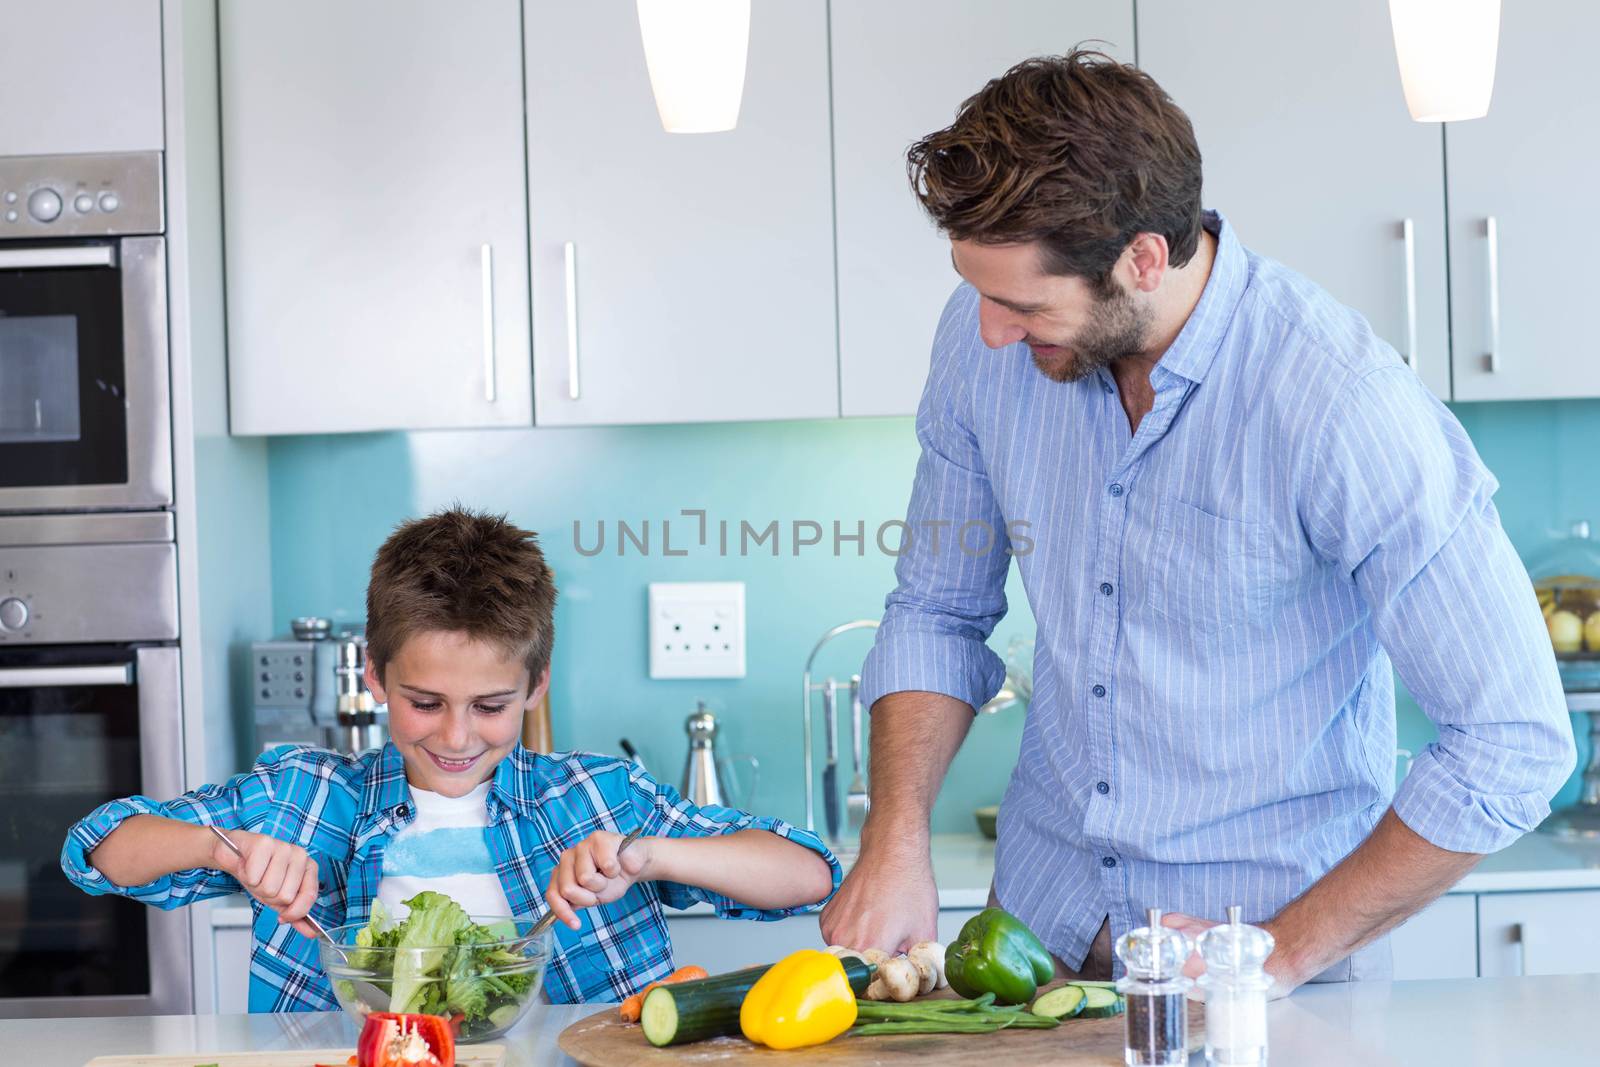 Happy family preparing lunch together at home in the kitchen